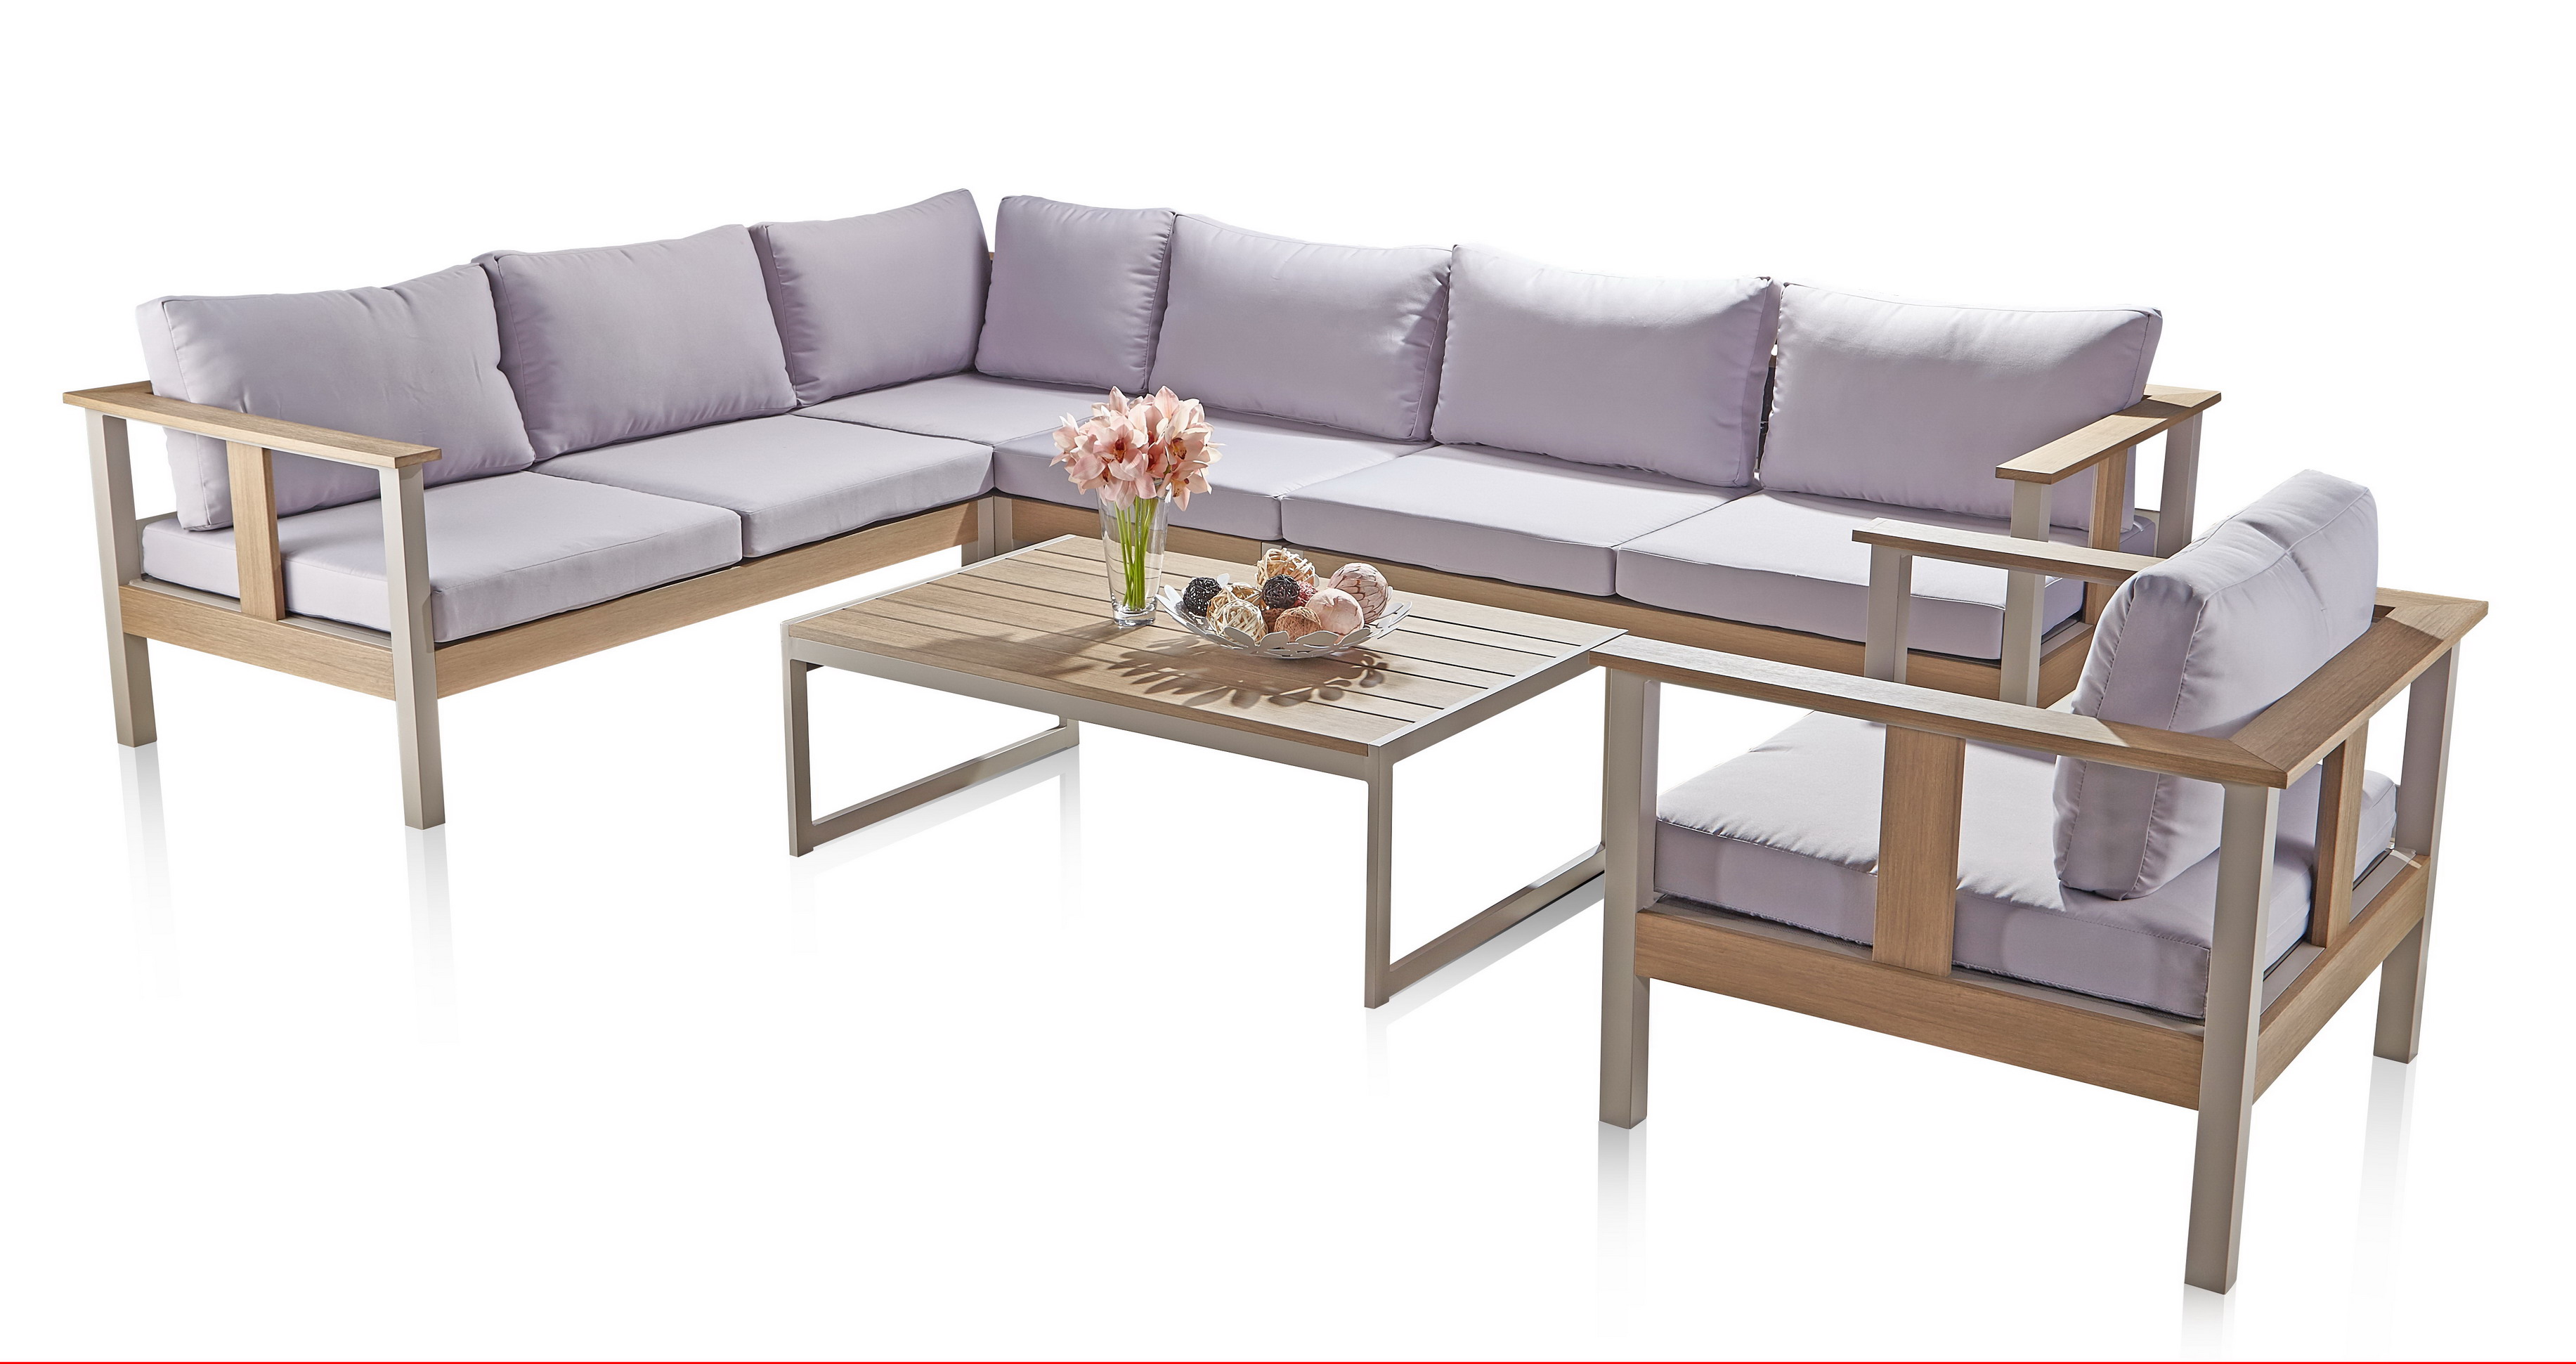 Cheapest Outdoor Furniture Polywood Sofa Wholesale Price